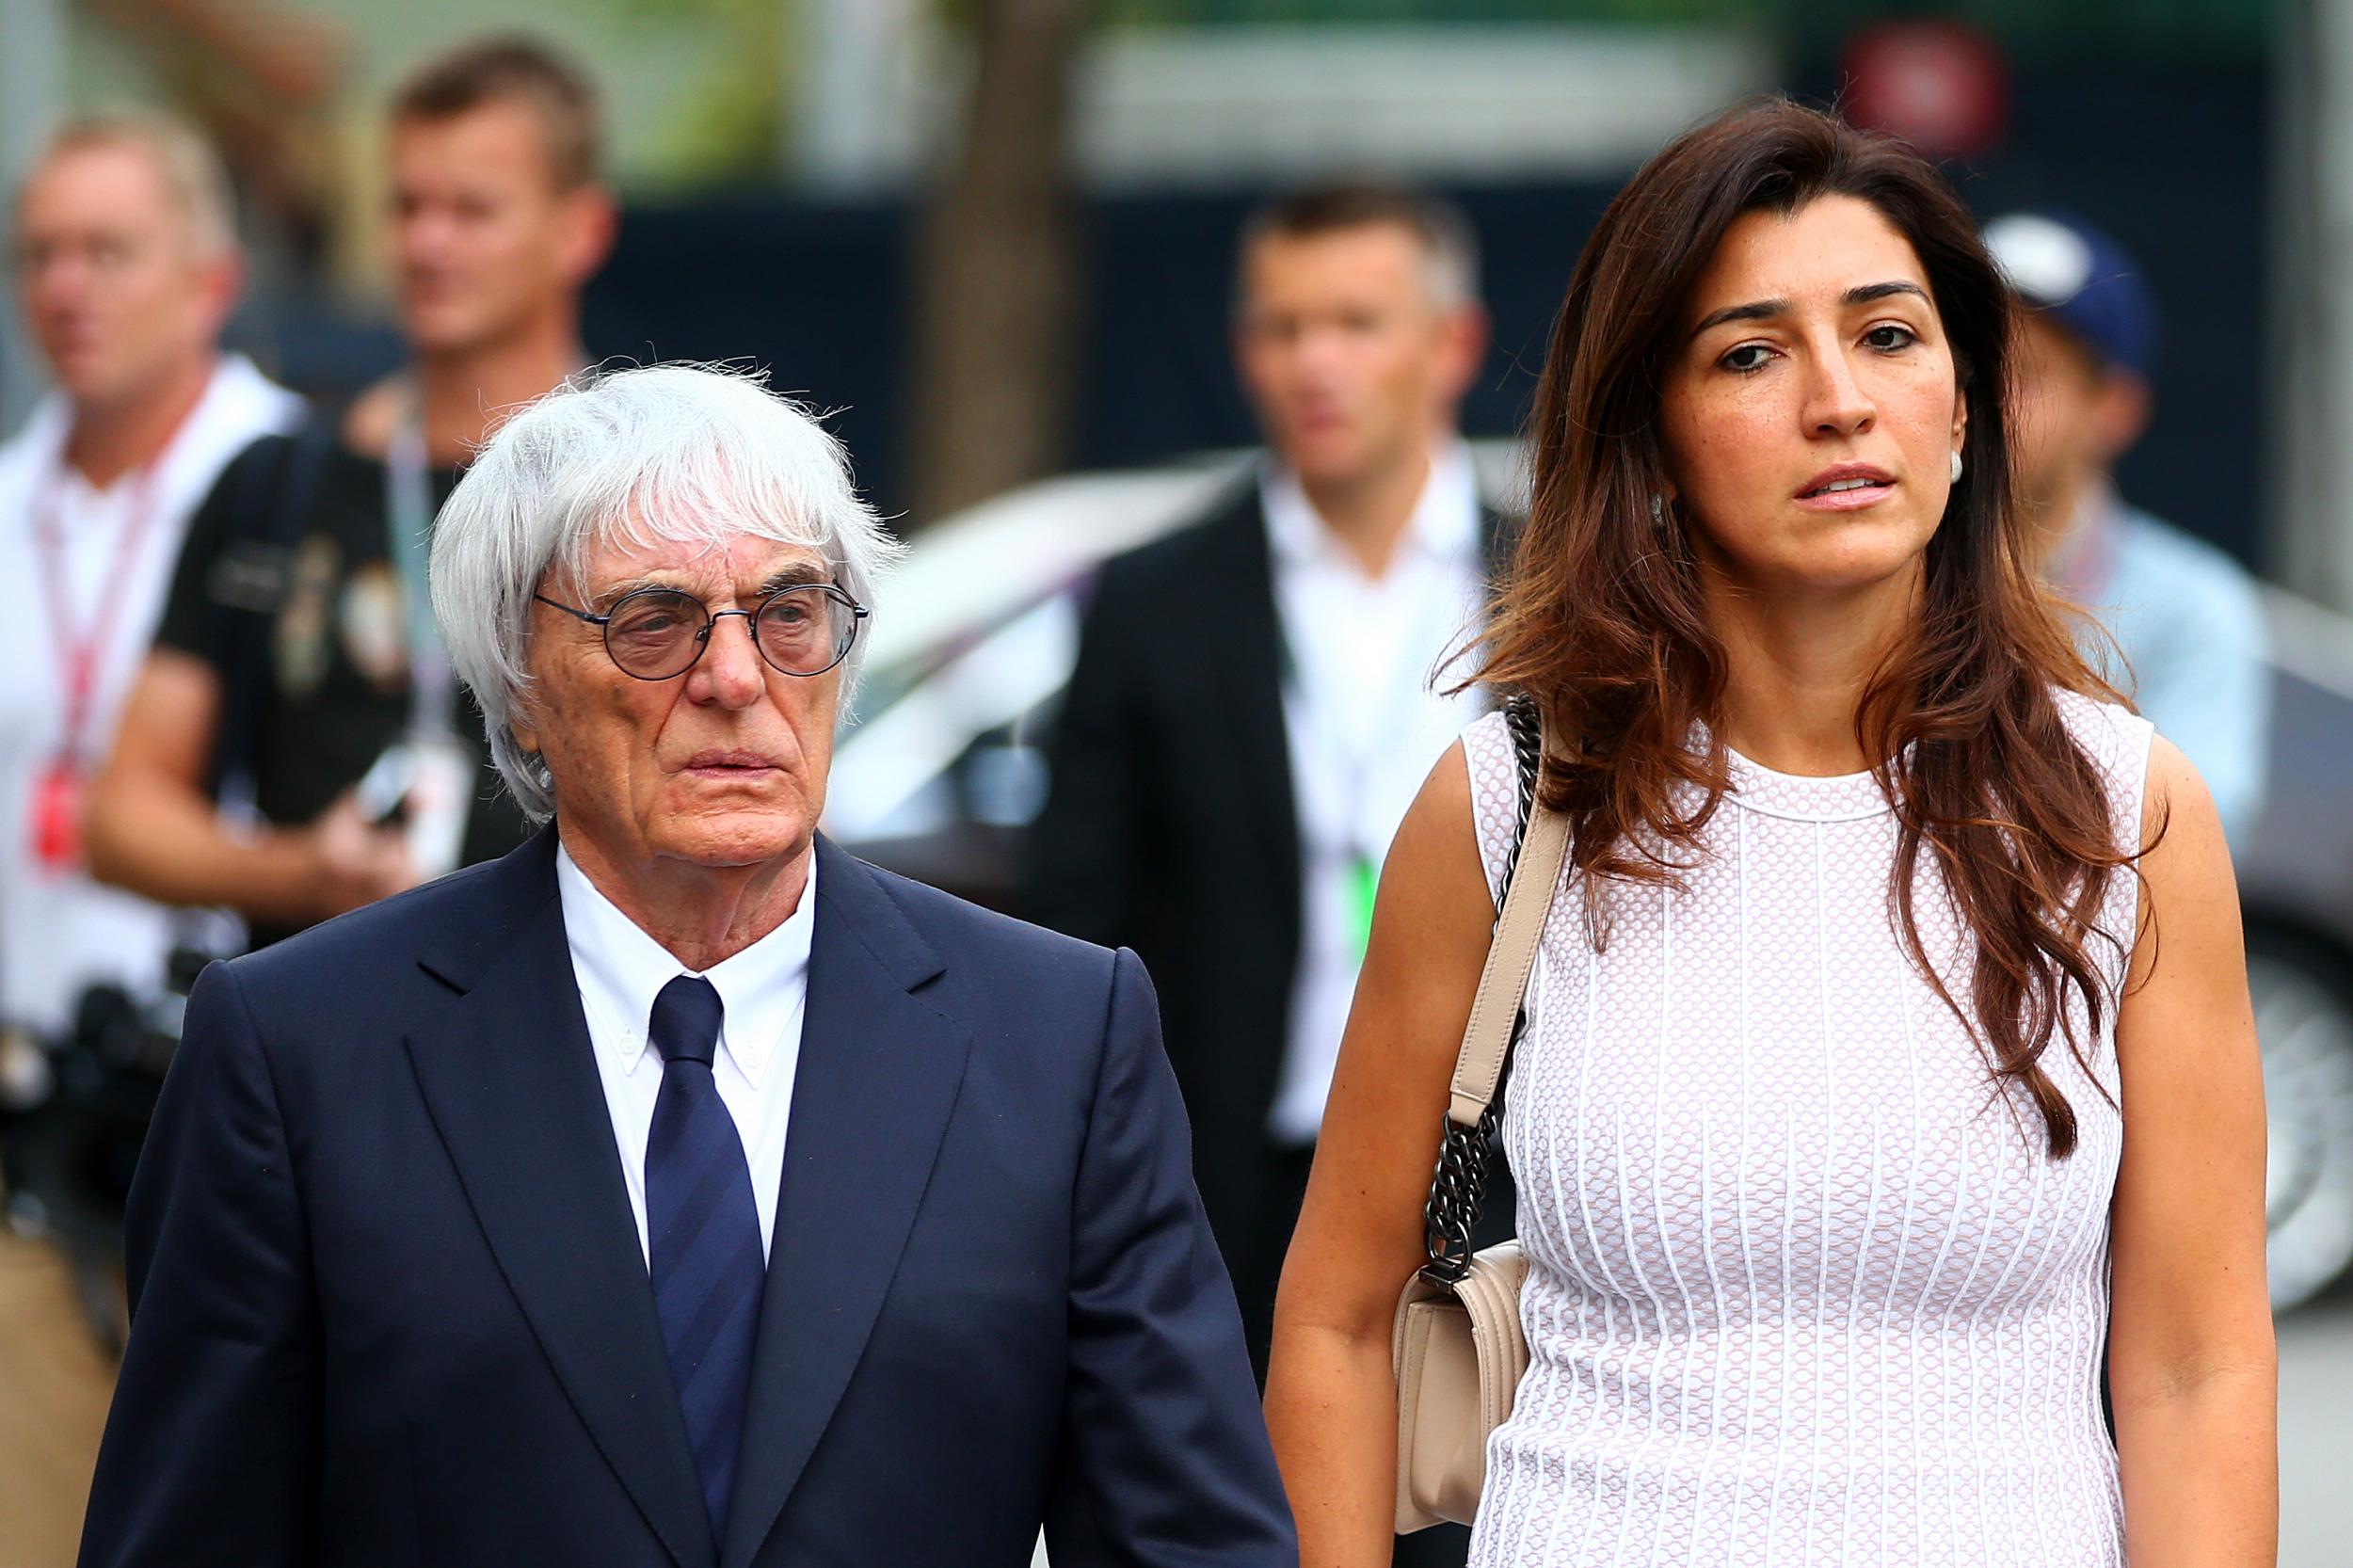 Bernie Ecclestone and his wife Fabiana Flosi, whose mother was kidnapped from her home in Brazil